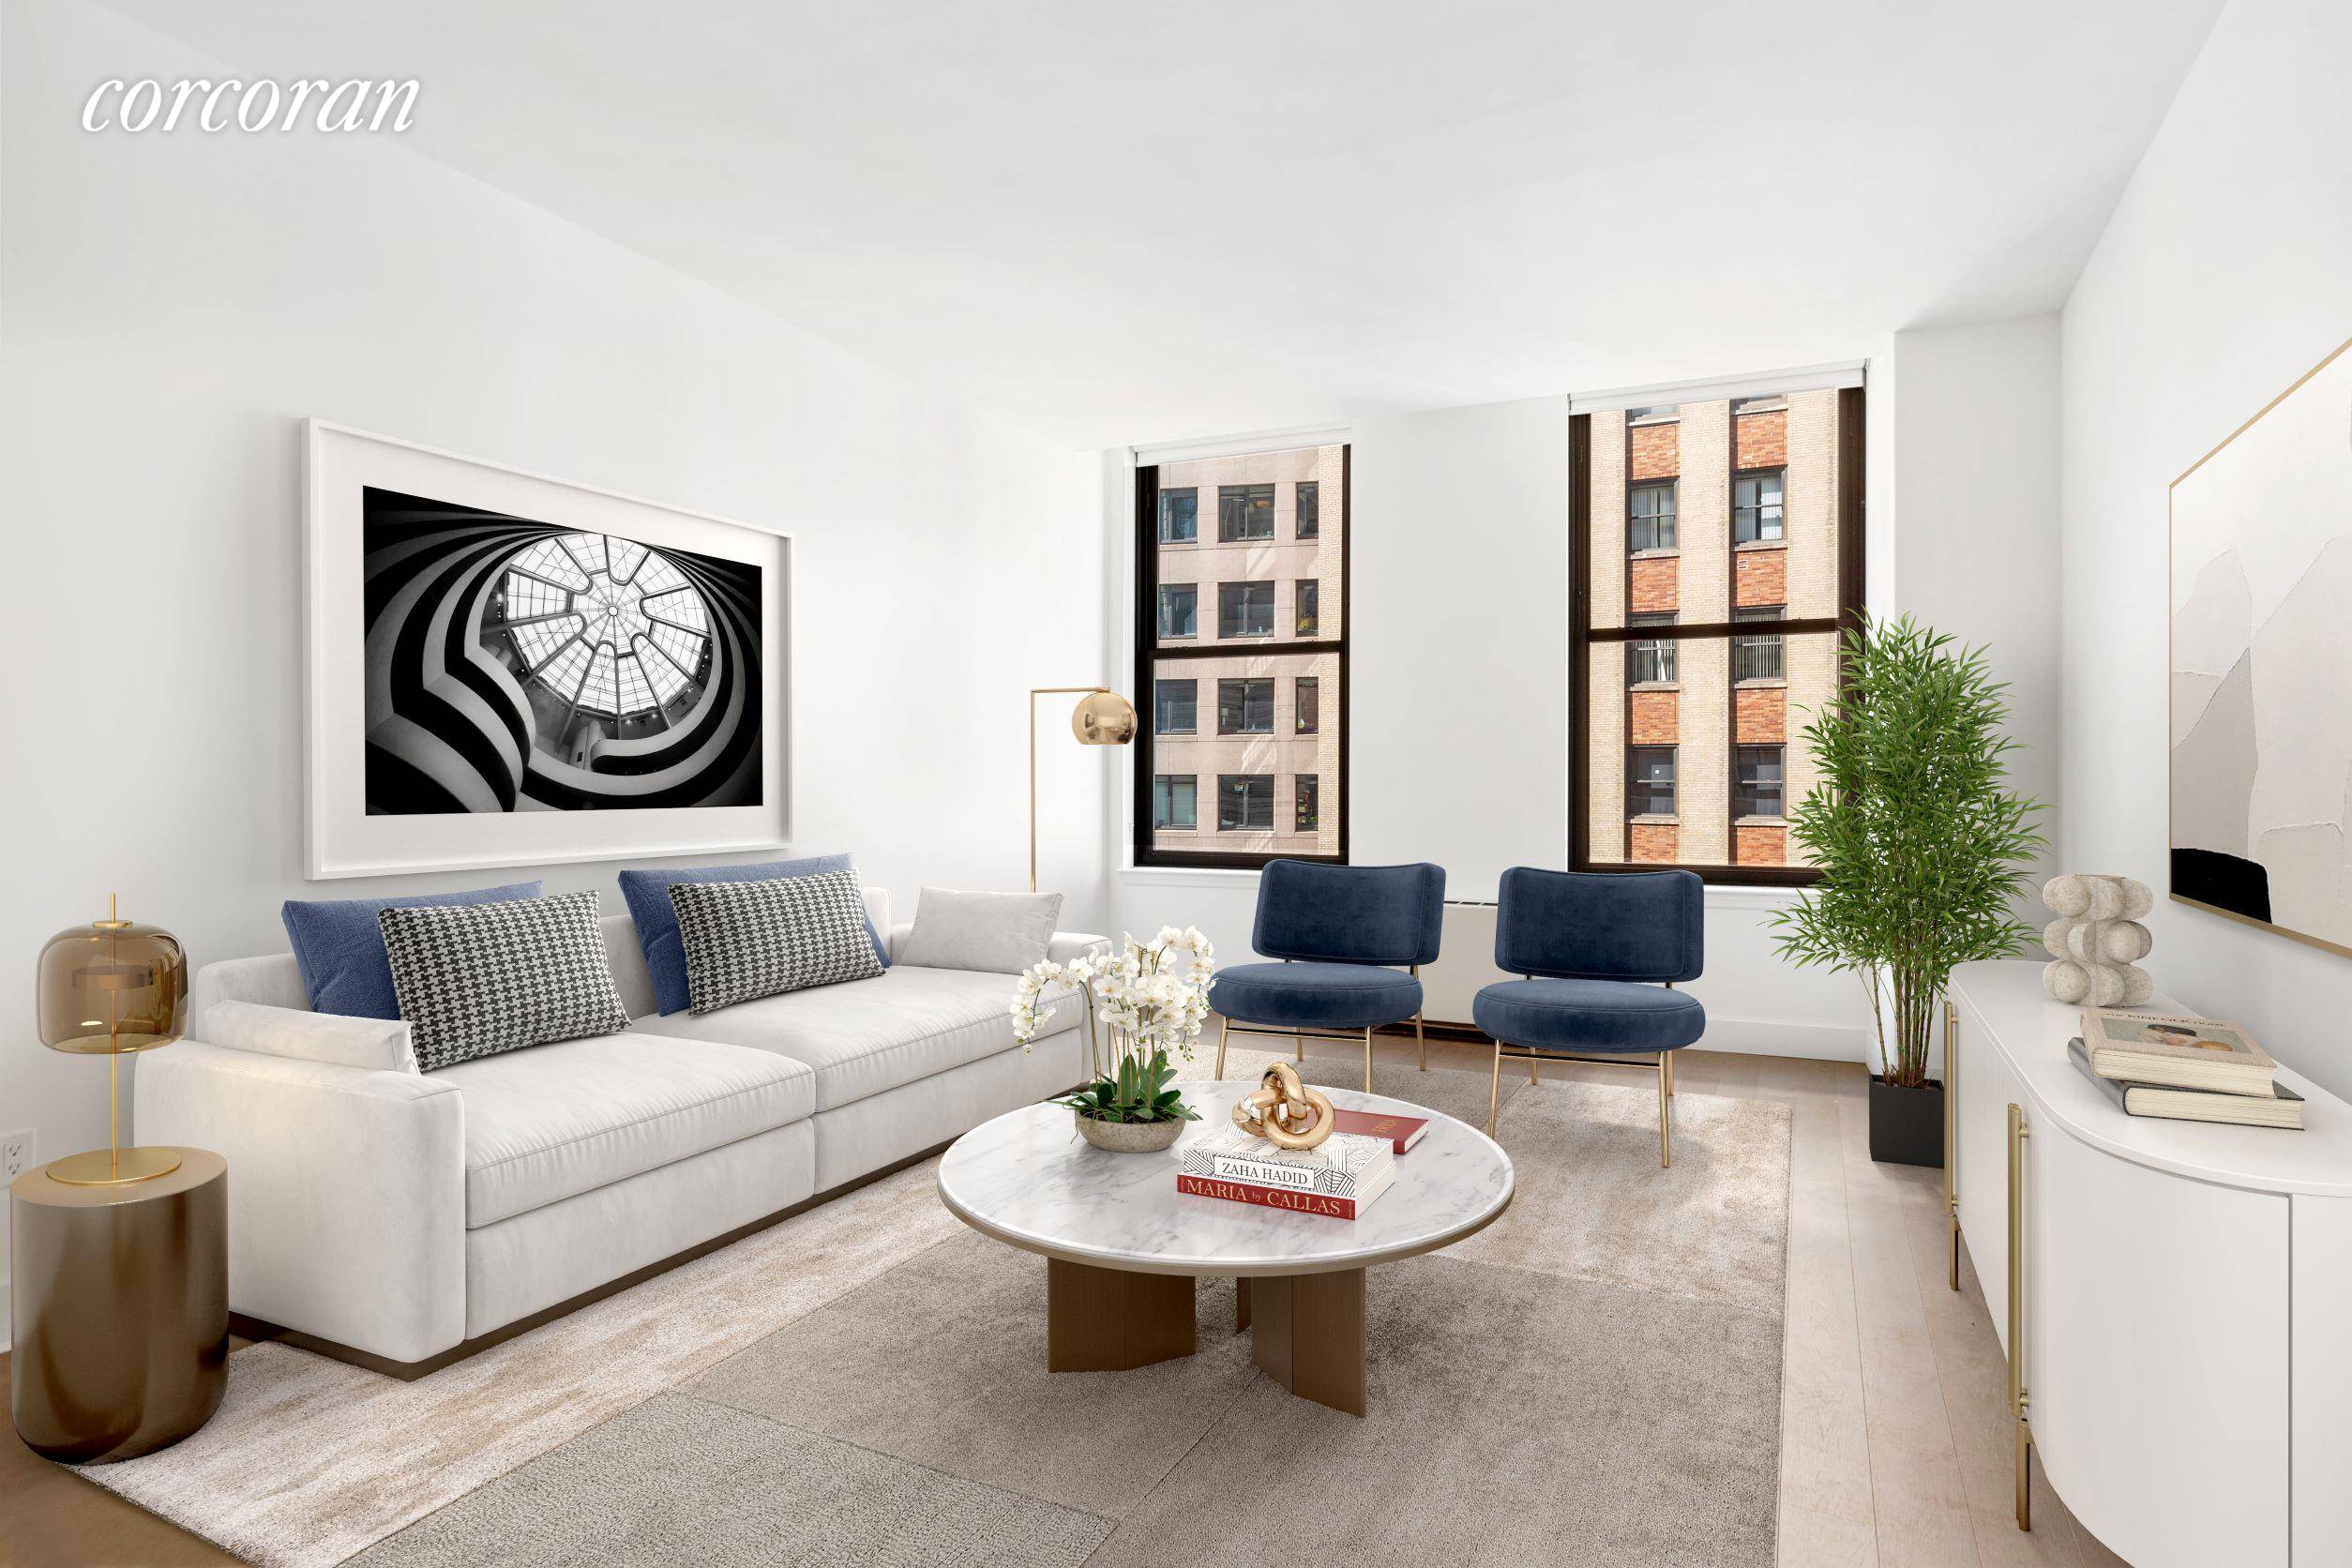 MMEDIATE OCCUPANCY. Welcome to the Broad Exchange Building, where the timeless grandeur of New York's storied past meets spacious, sophisticated, and modern residences that are ideal for contemporary living.